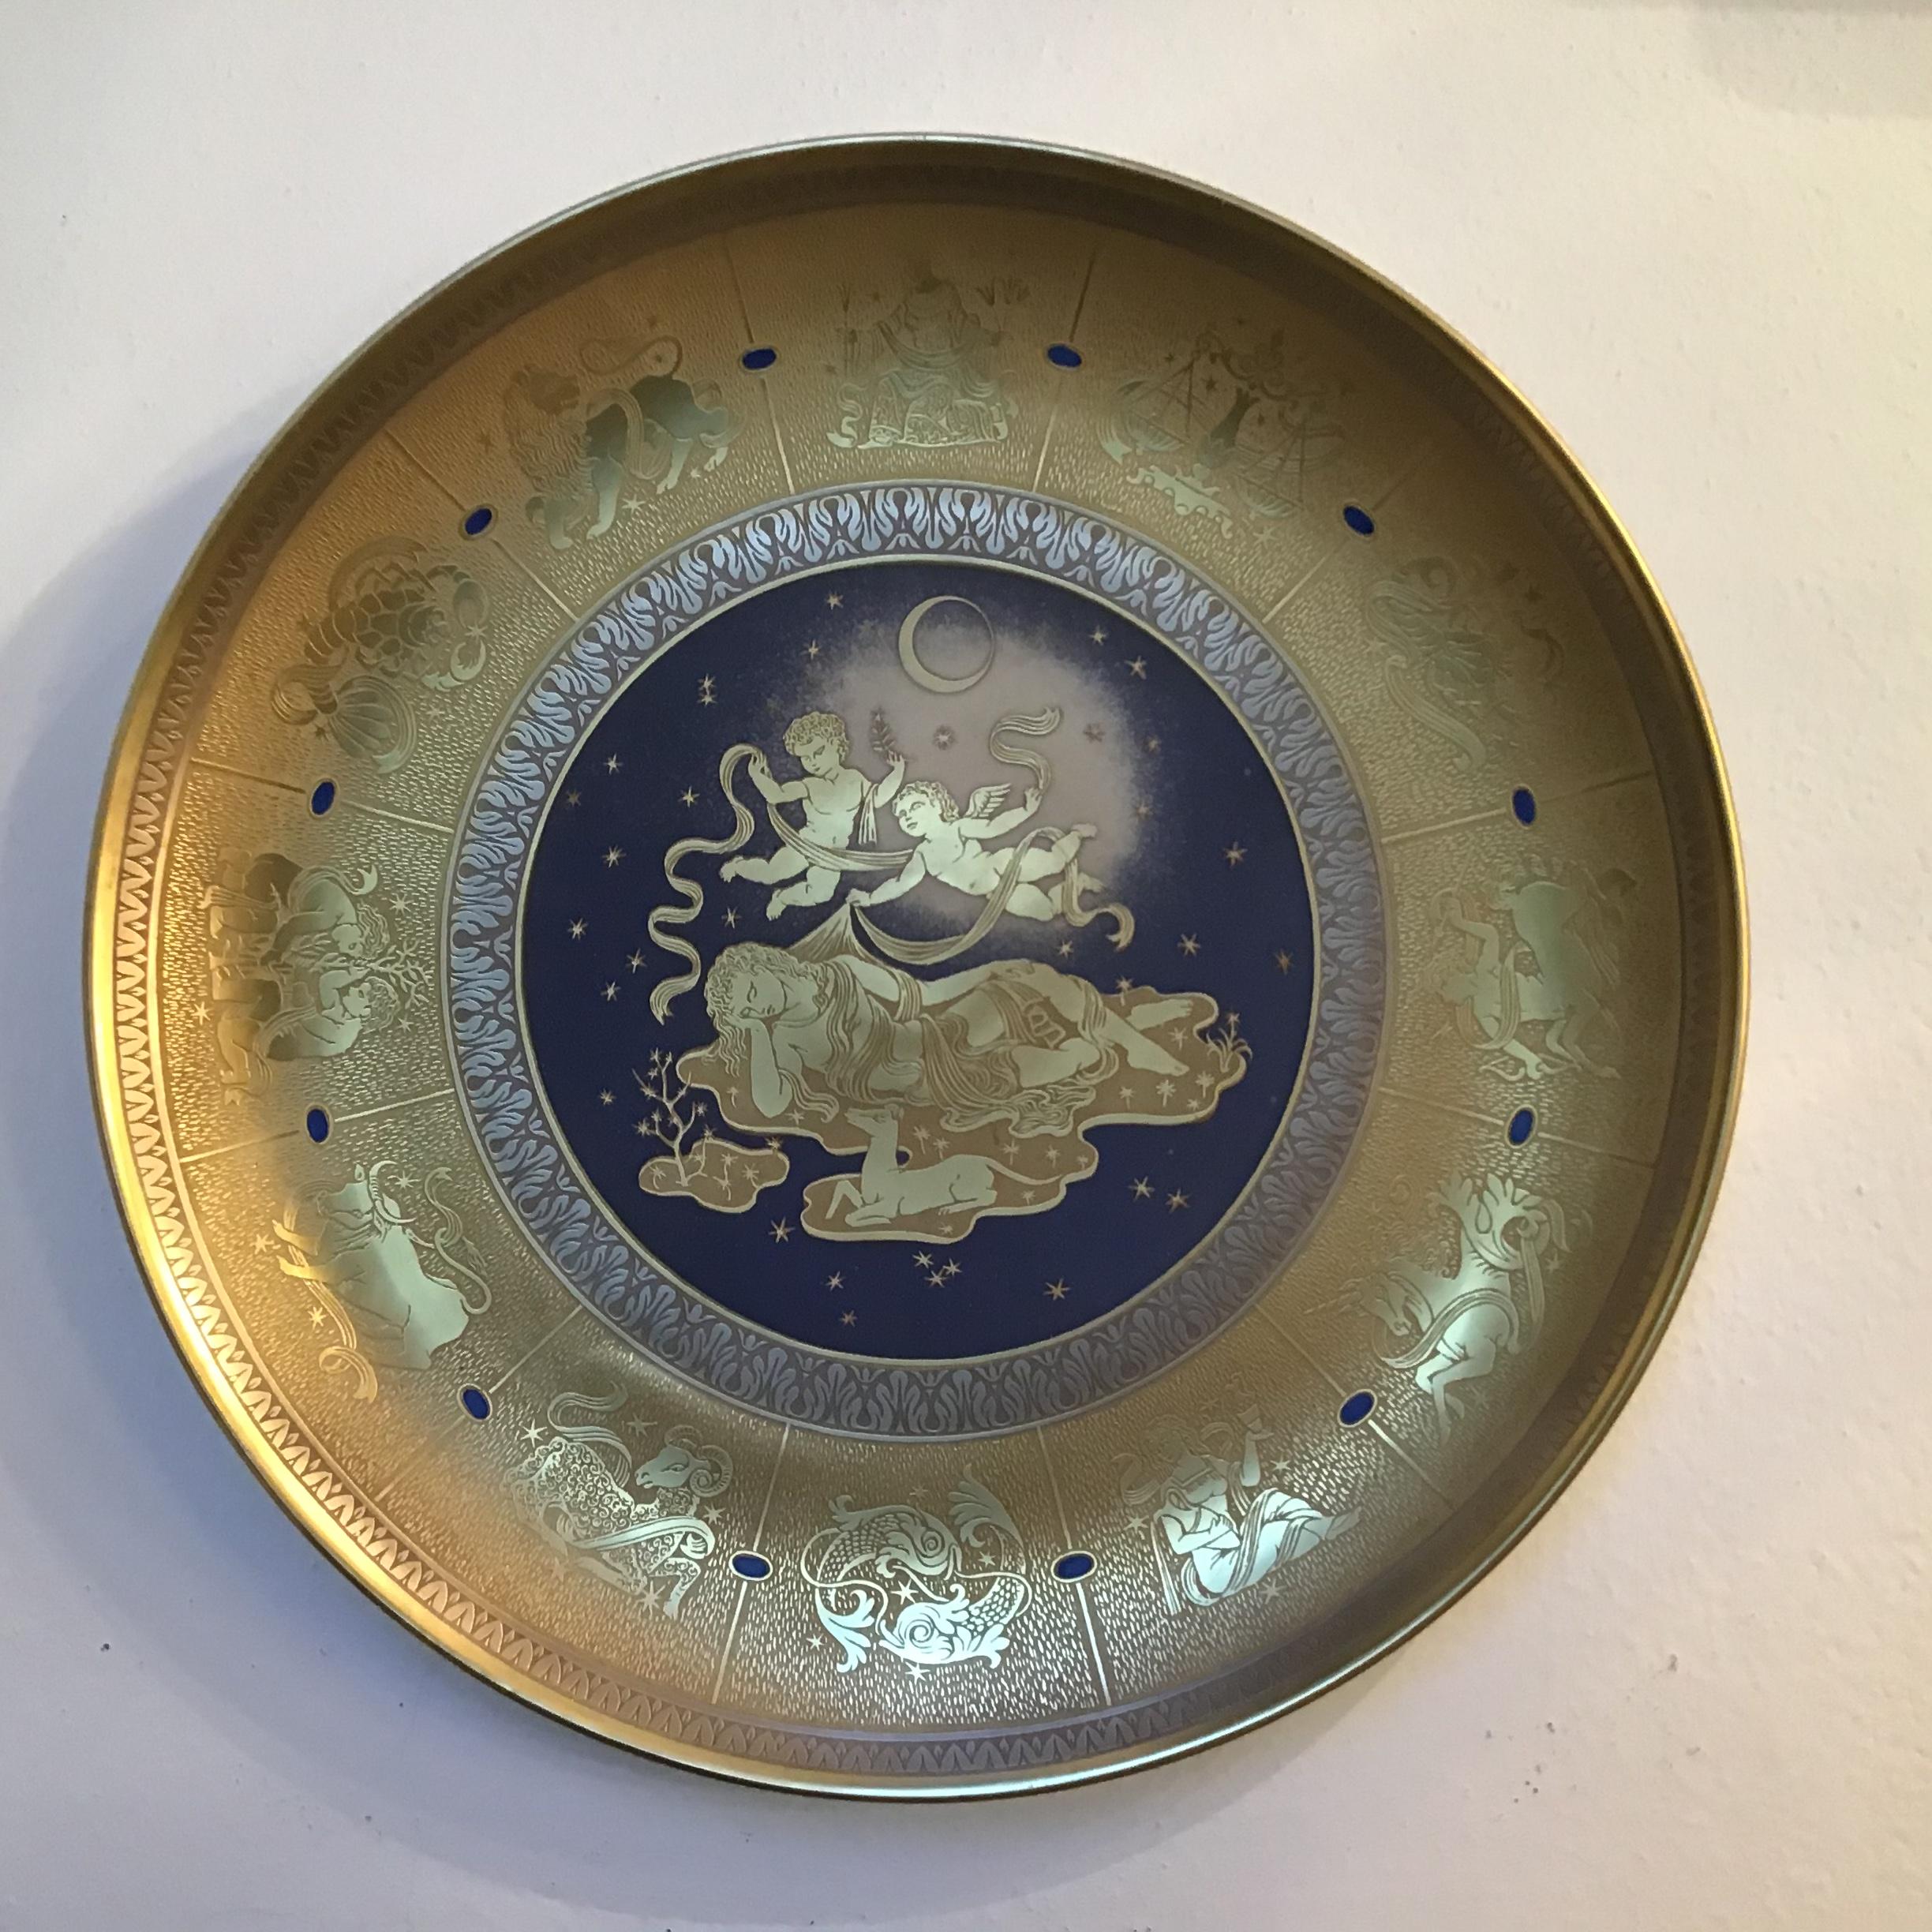 Morbelli Wall Plate Gold Porcelain #La Notte” 1960 Italy For Sale 6